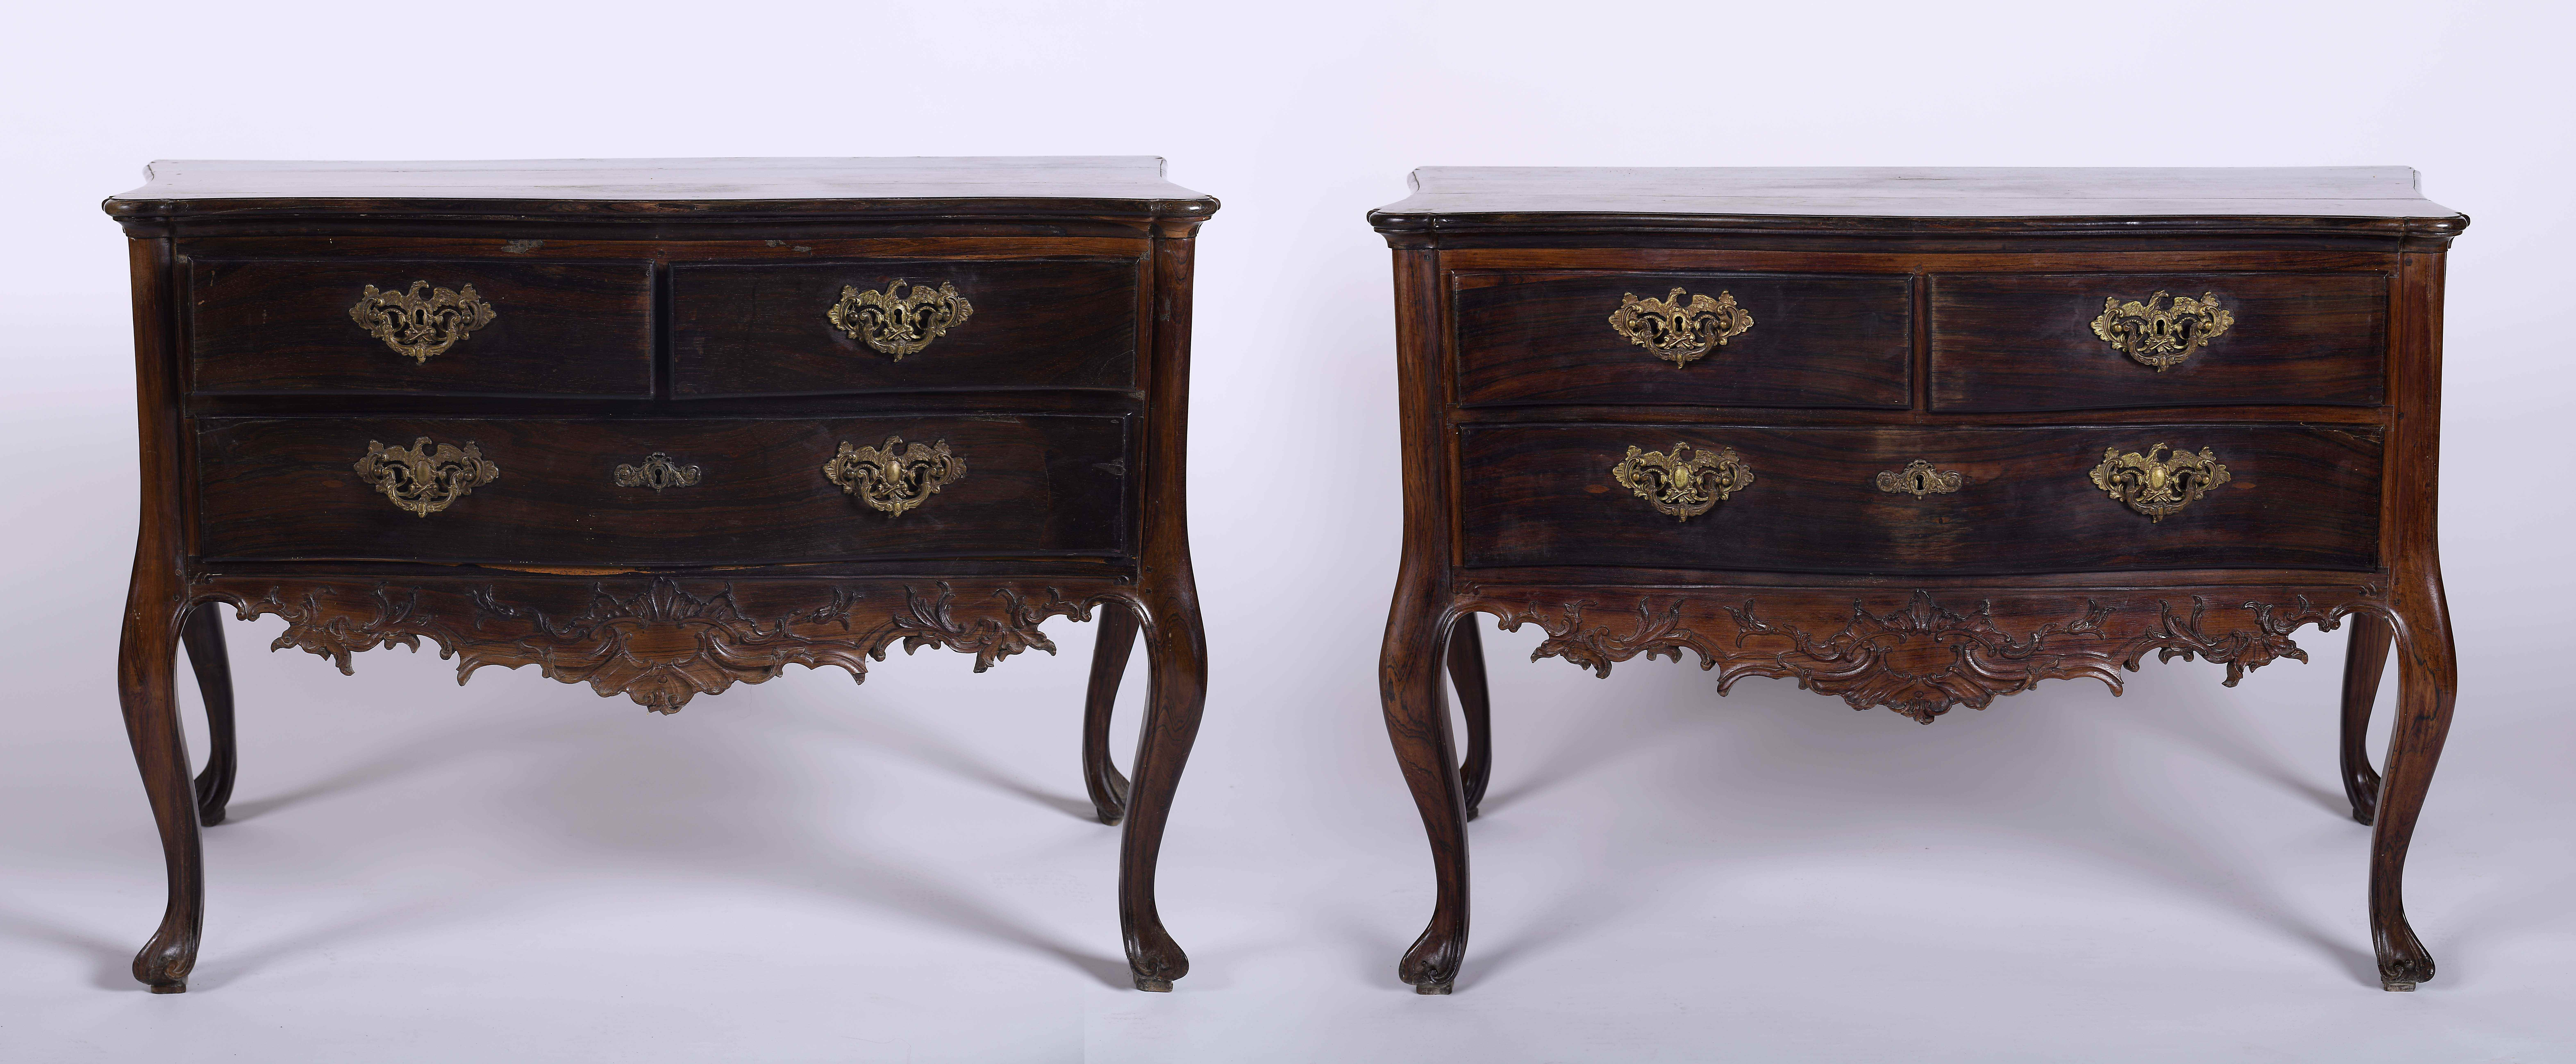 A pair of commodes